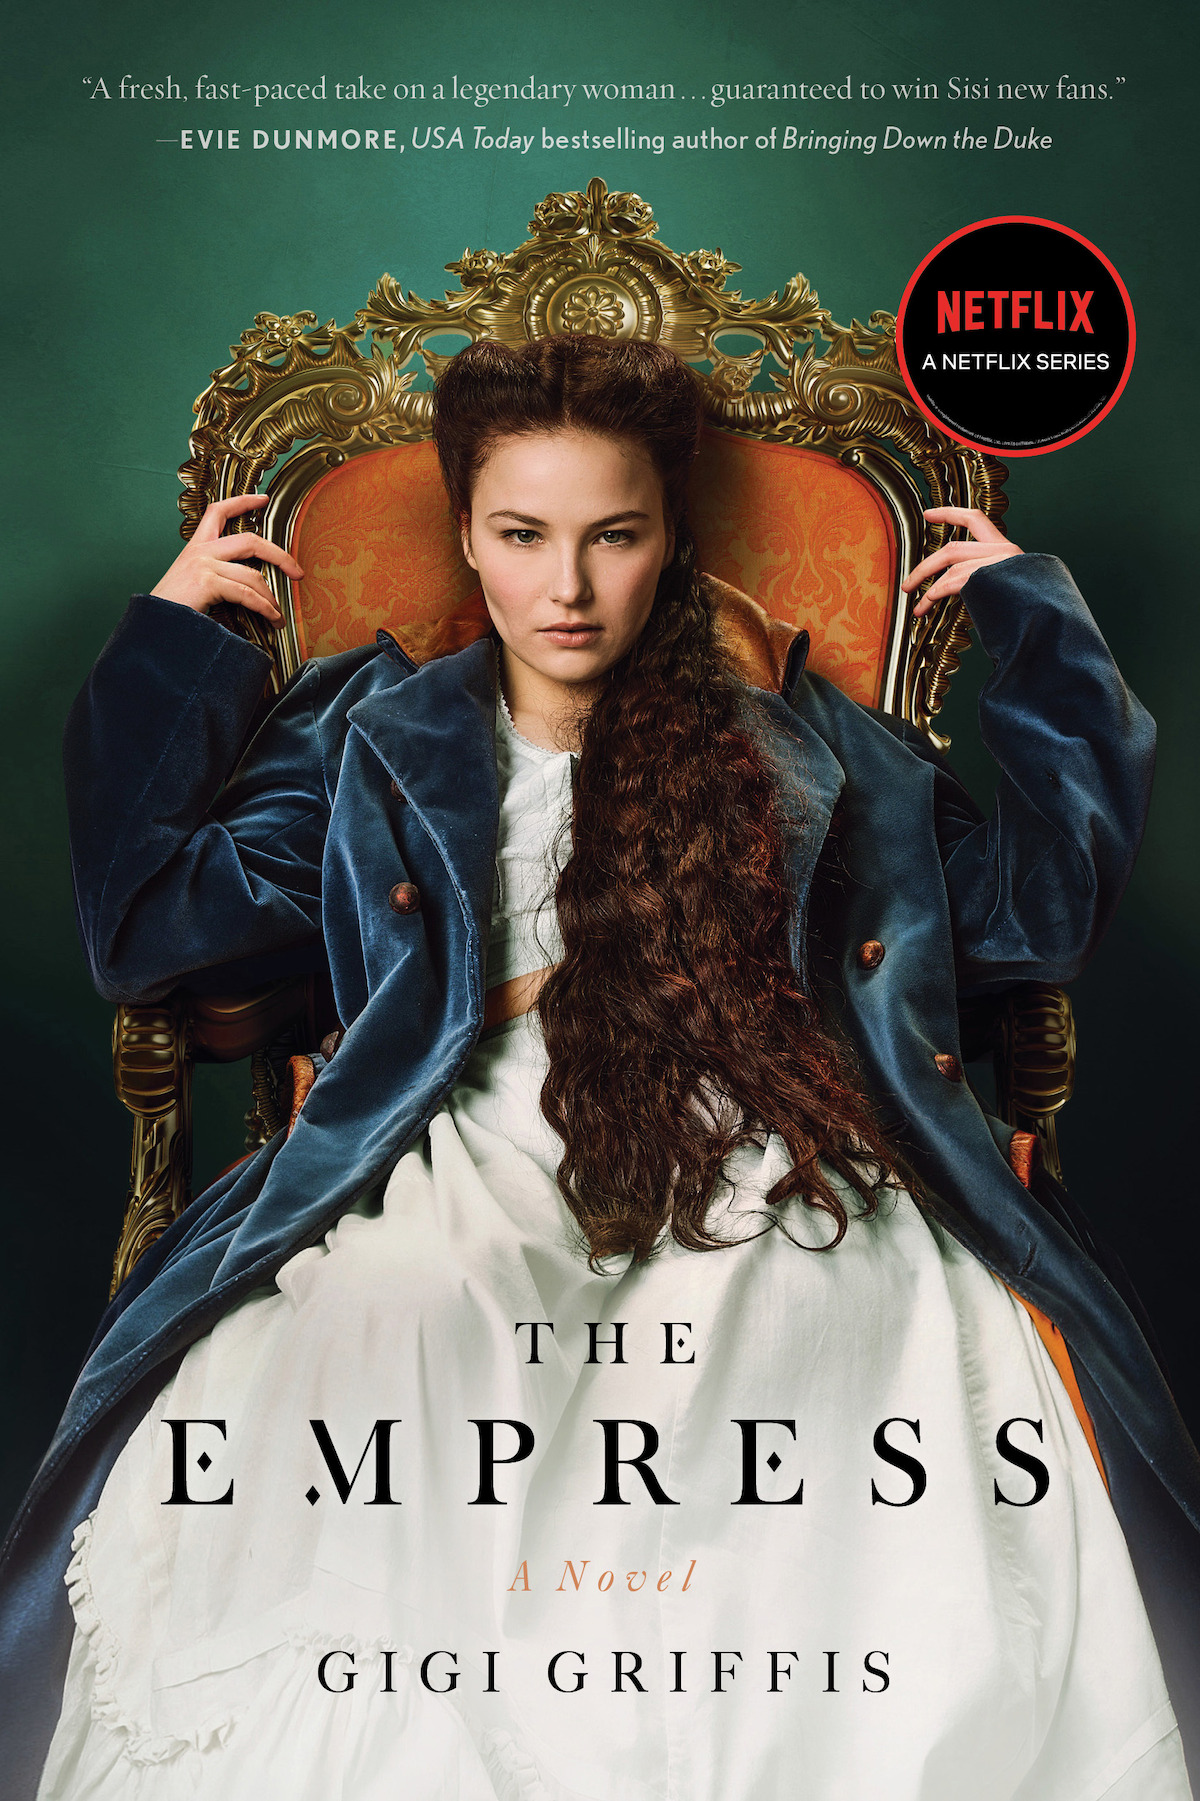 The Empress by Gigi Griffis Read an Excerpt of Chapter 1